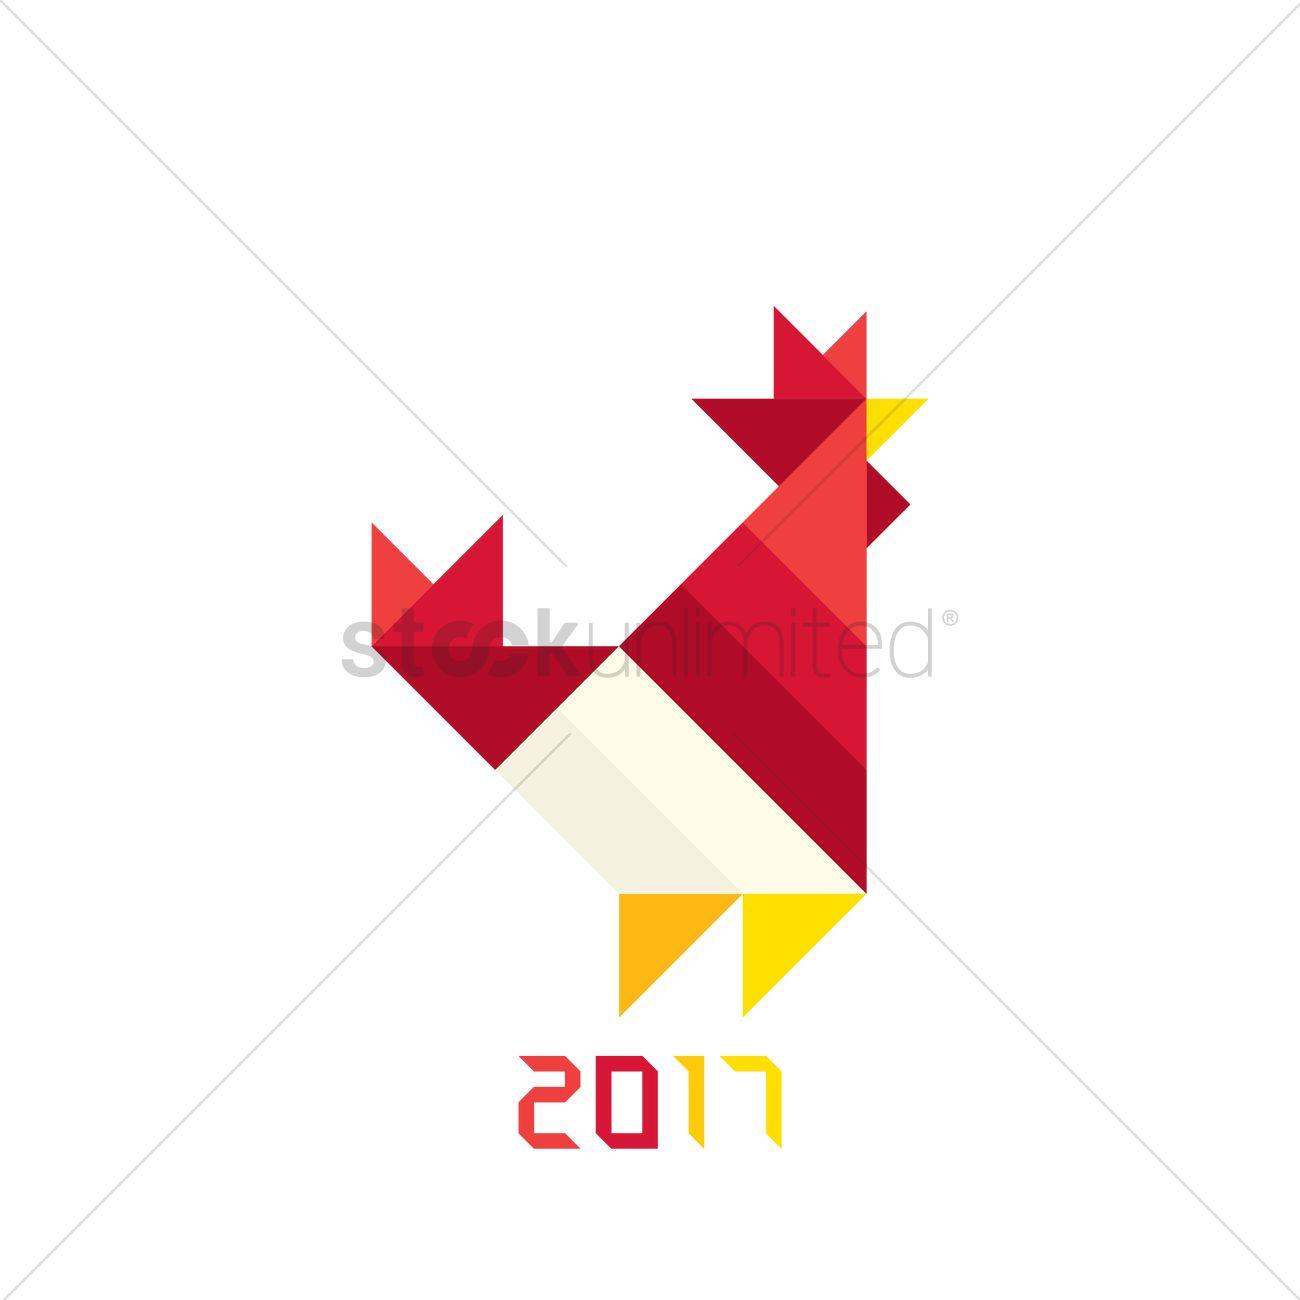 Triangle with Rooster Logo - Rooster Triangle Logo | www.topsimages.com